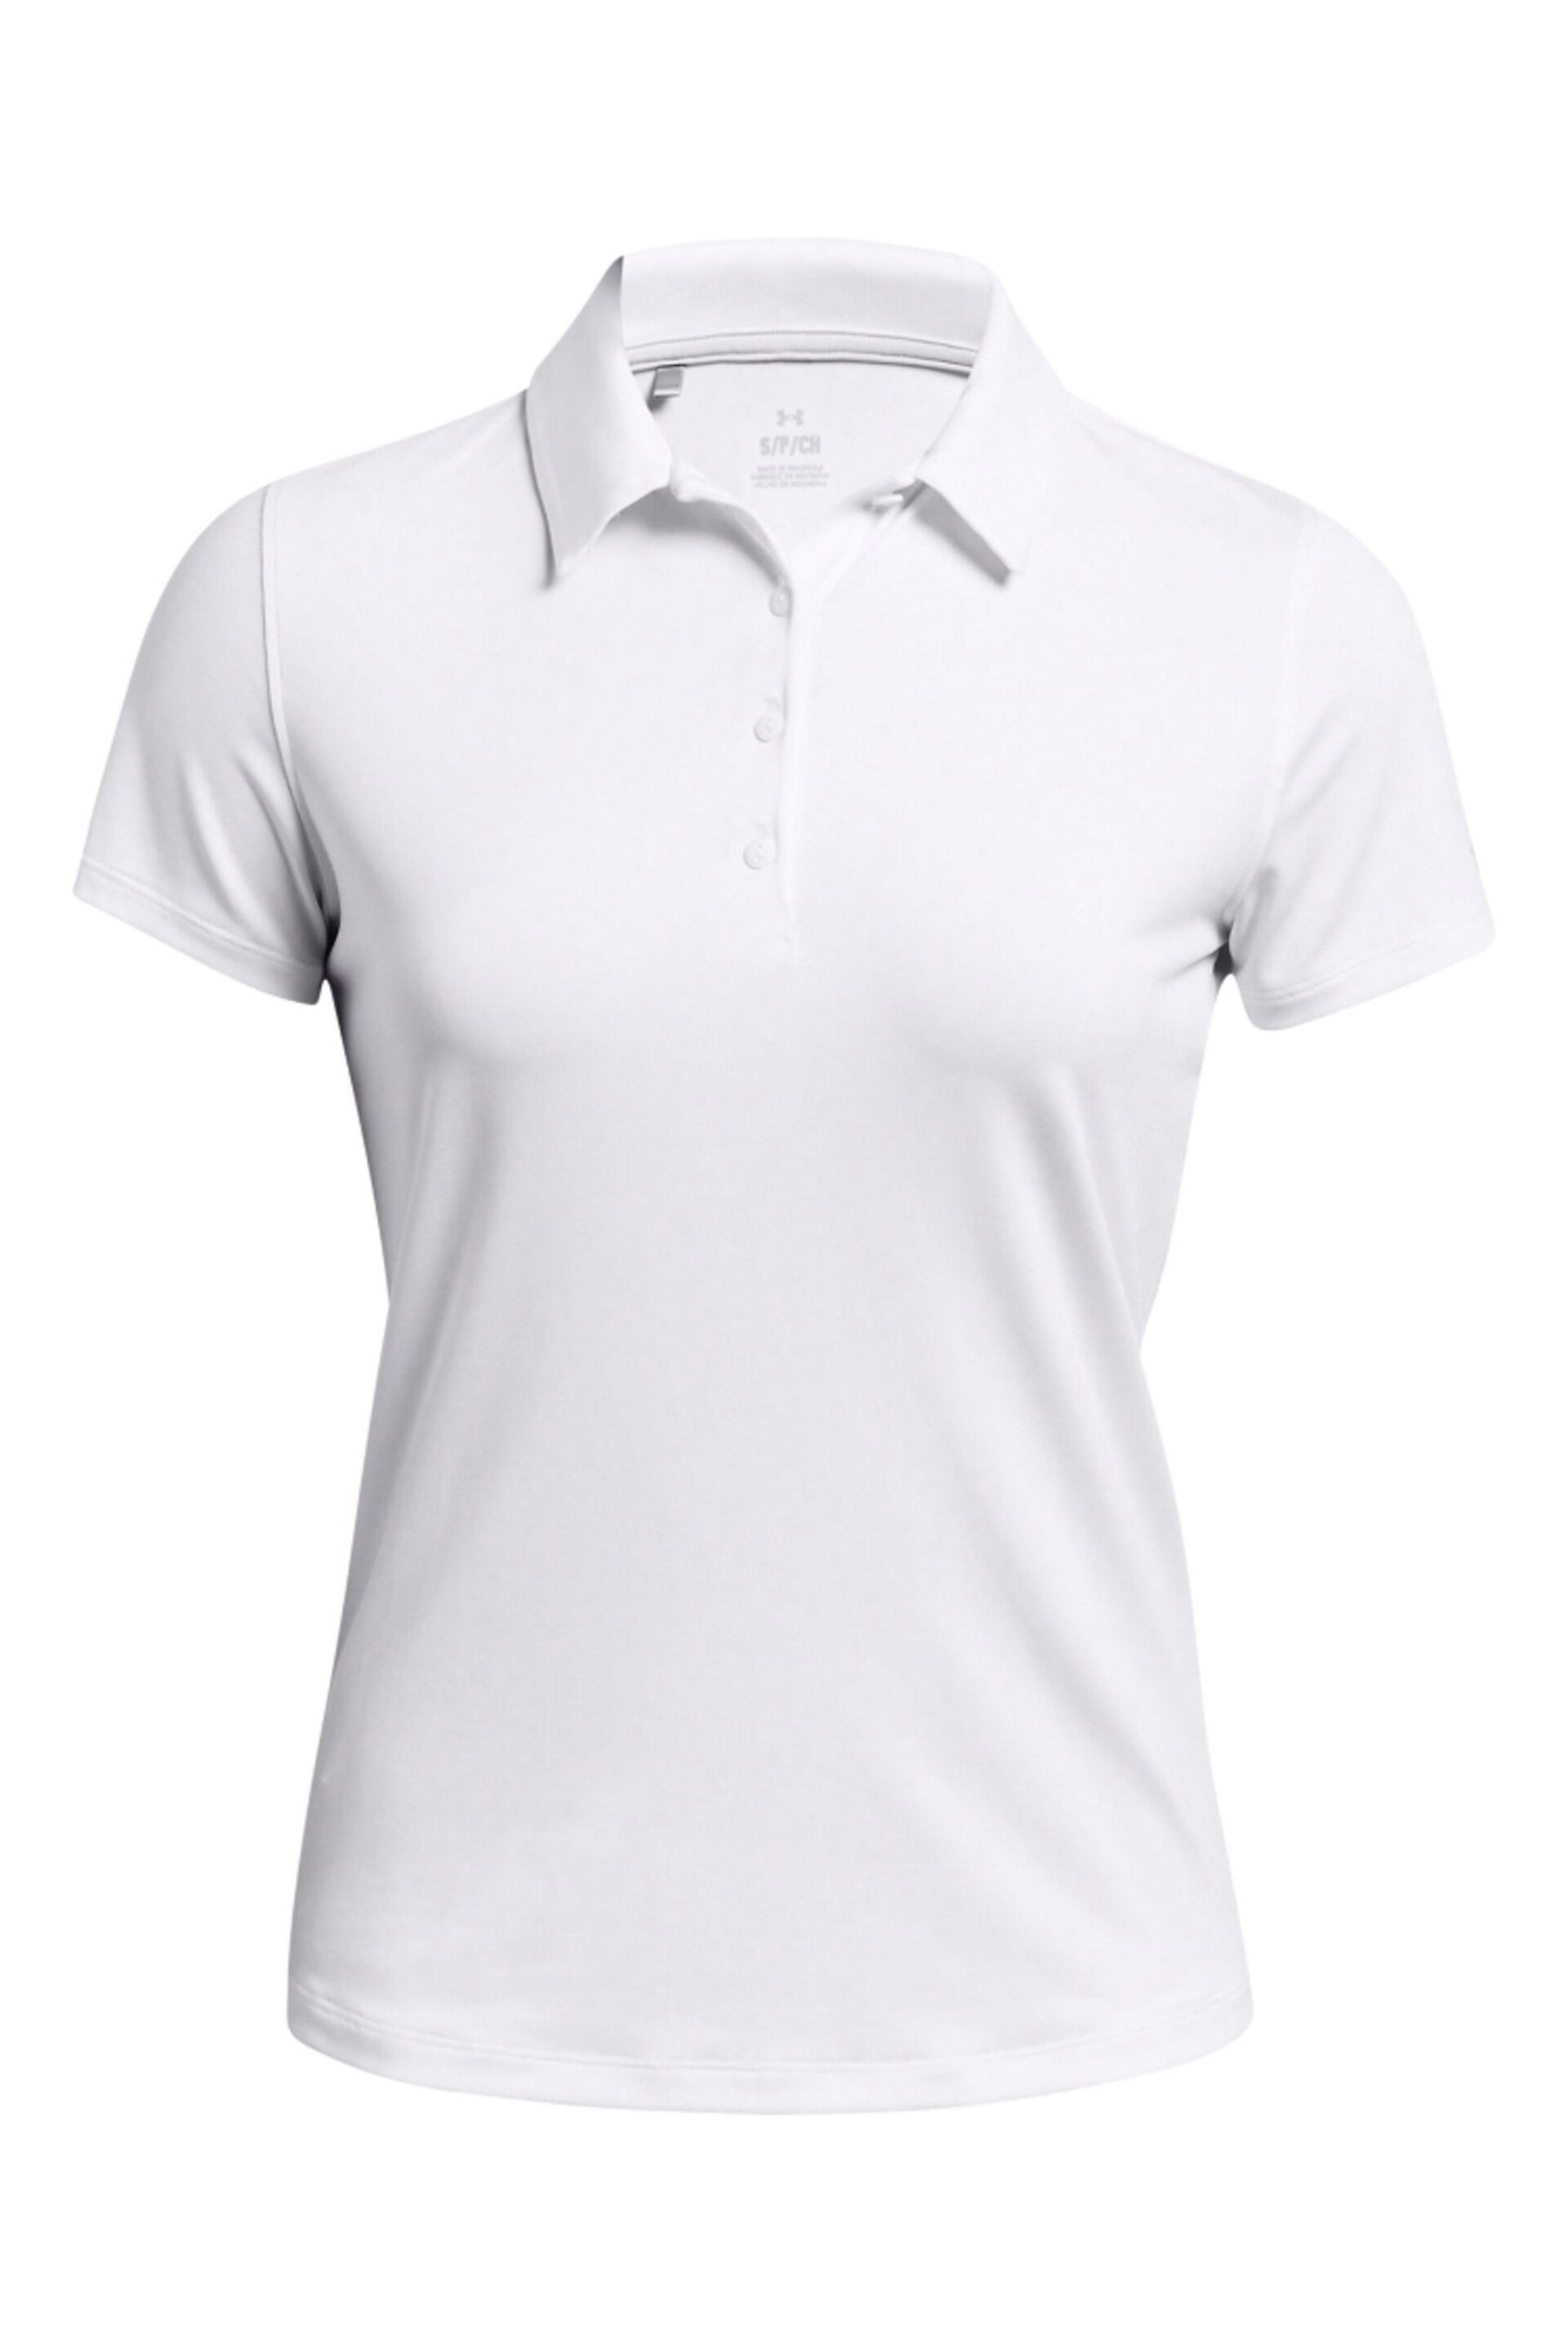 Under Armour White/Black Play Off Small Logo Polo Shirt - Image 3 of 4